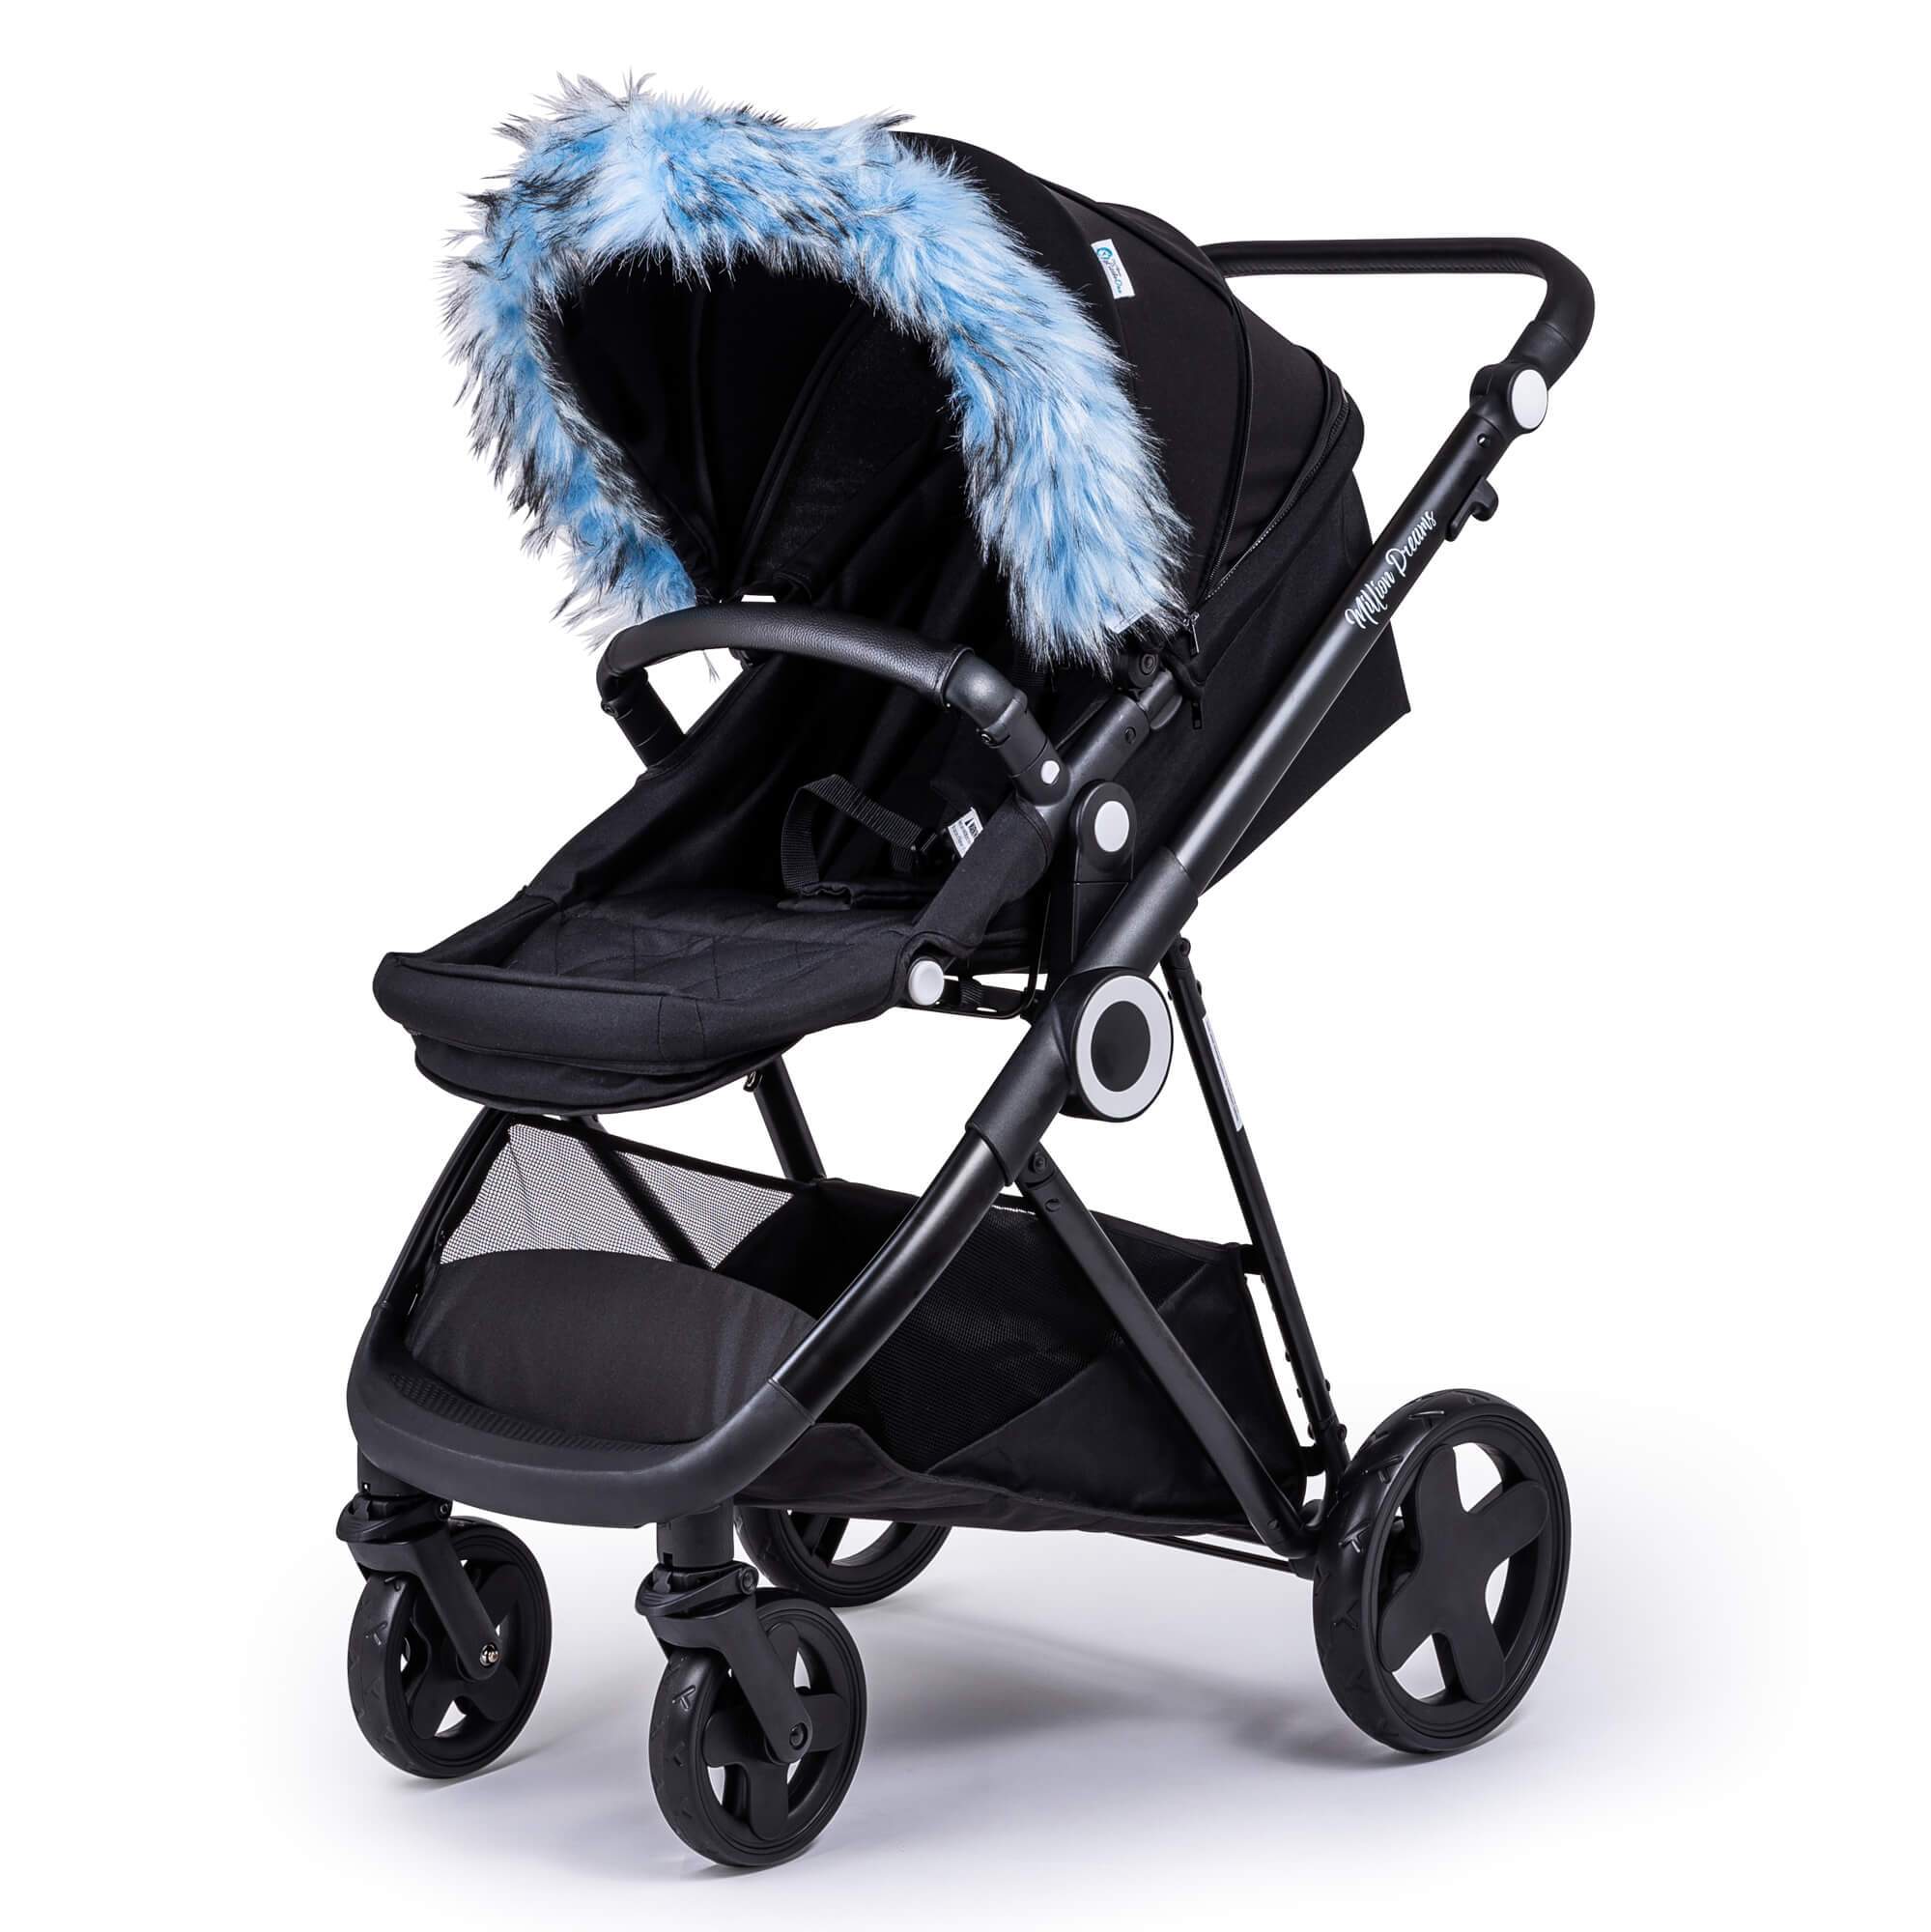 Pram Fur Hood Trim Attachment for Pushchair Compatible with Hybrid - For Your Little One